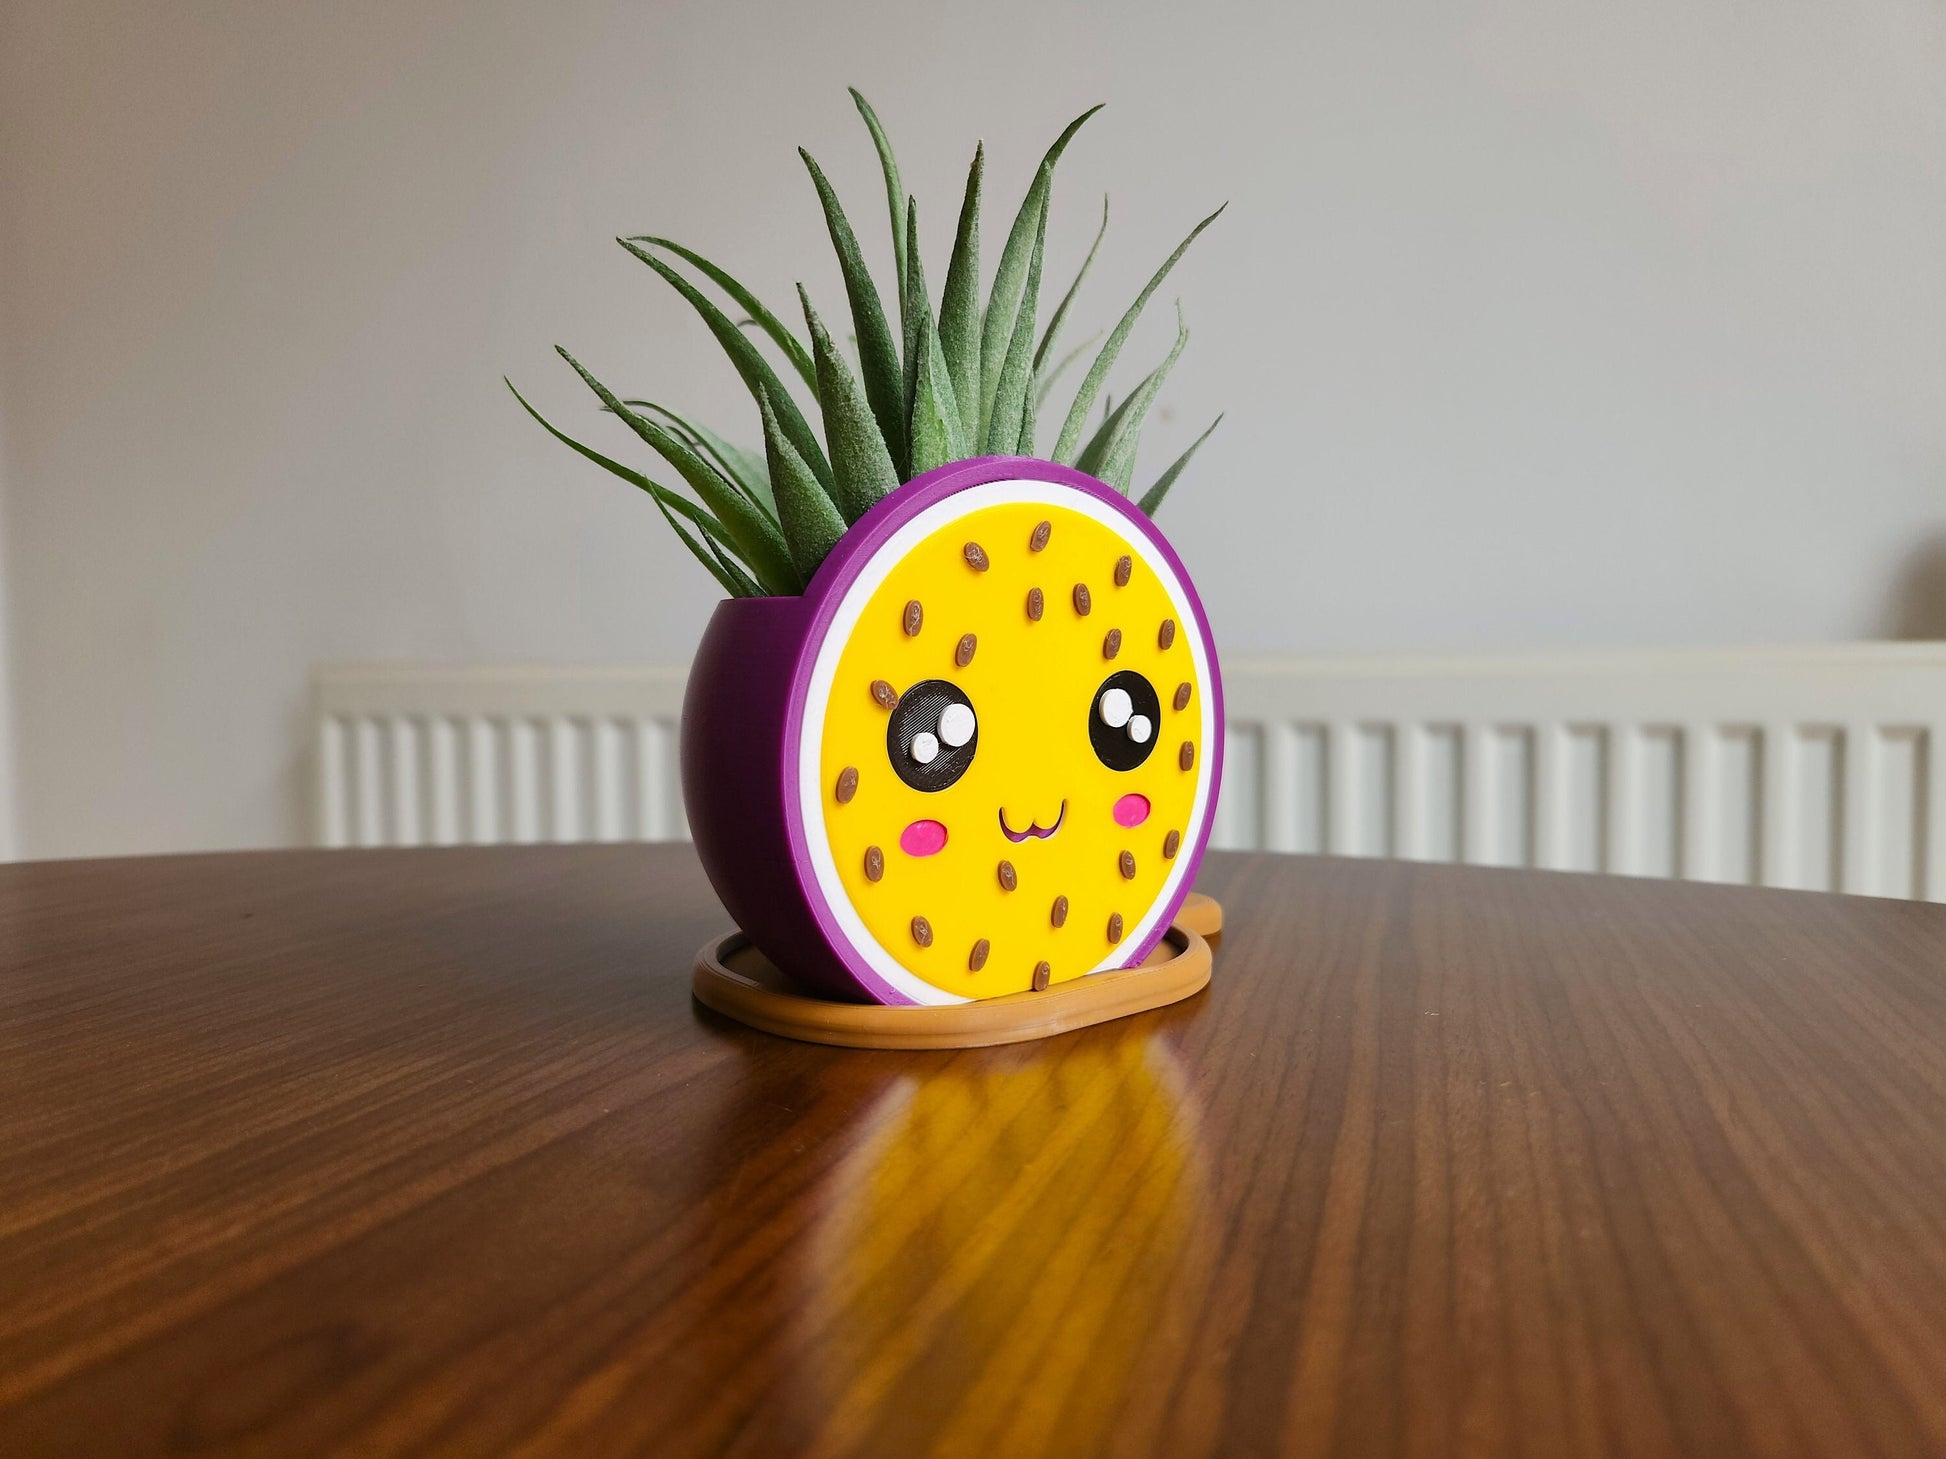 Kawaii Passion Fruit Shaped Flower Pot - Indoor Herb & Flower Planter - 2 Sizes Available